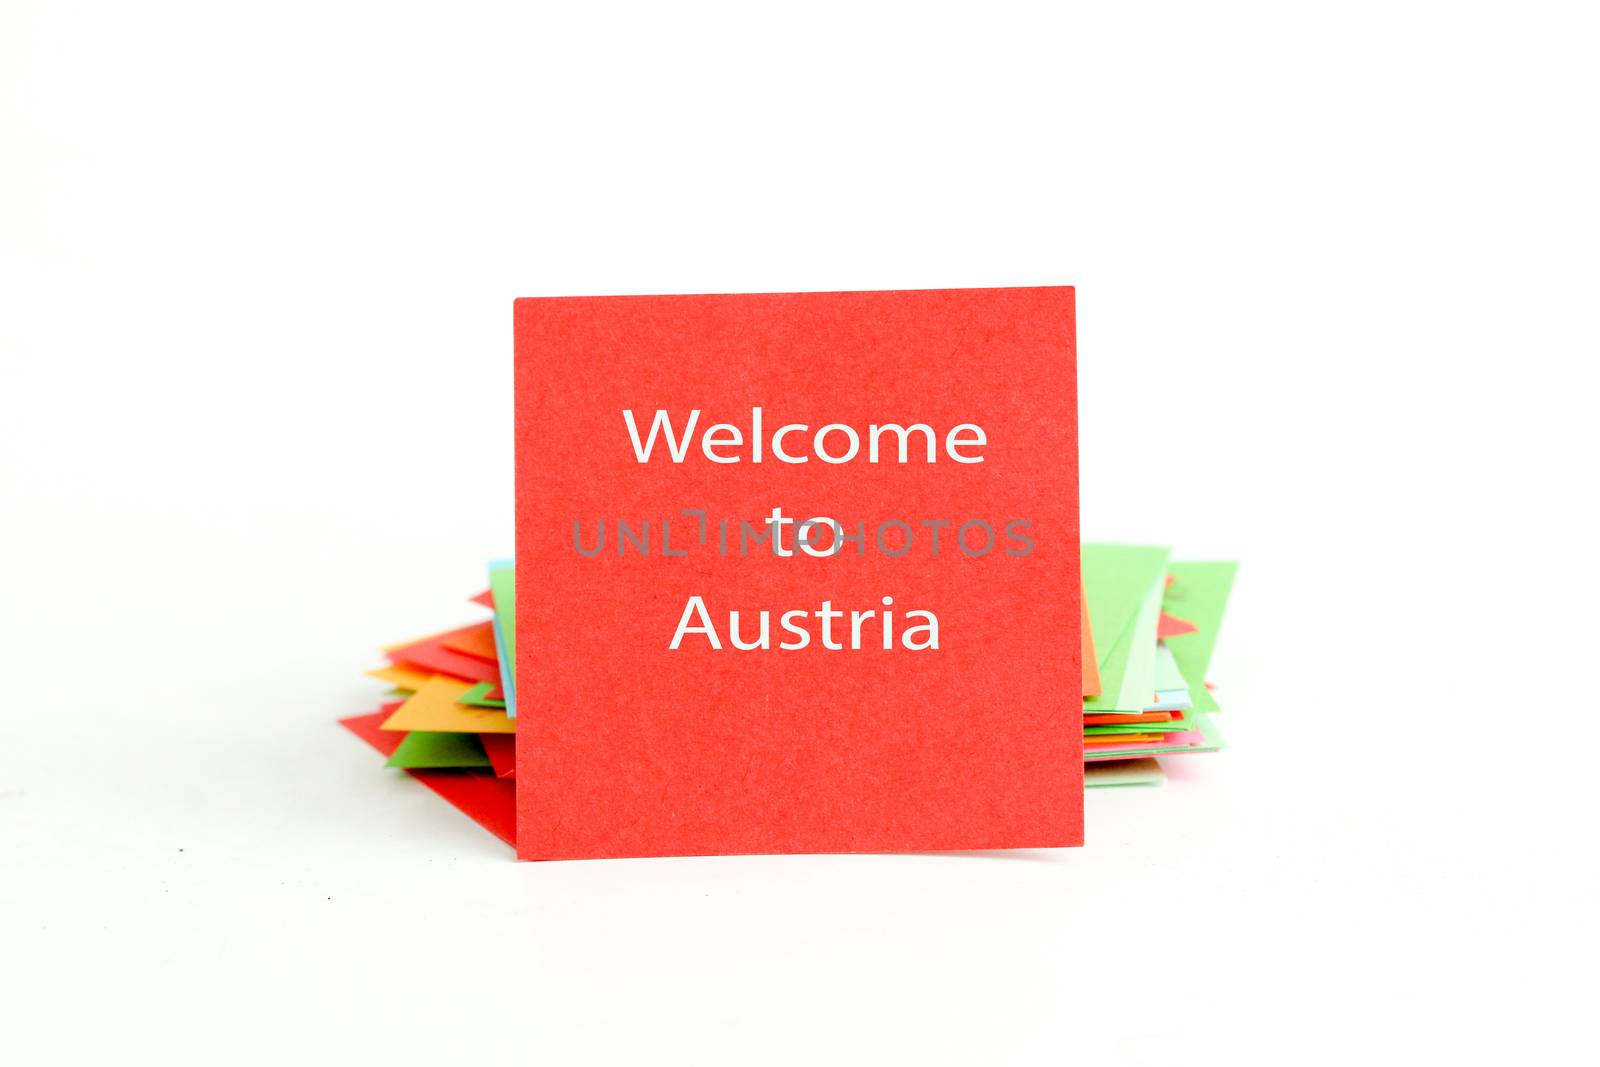 picture of a red note paper with text welcome to austria